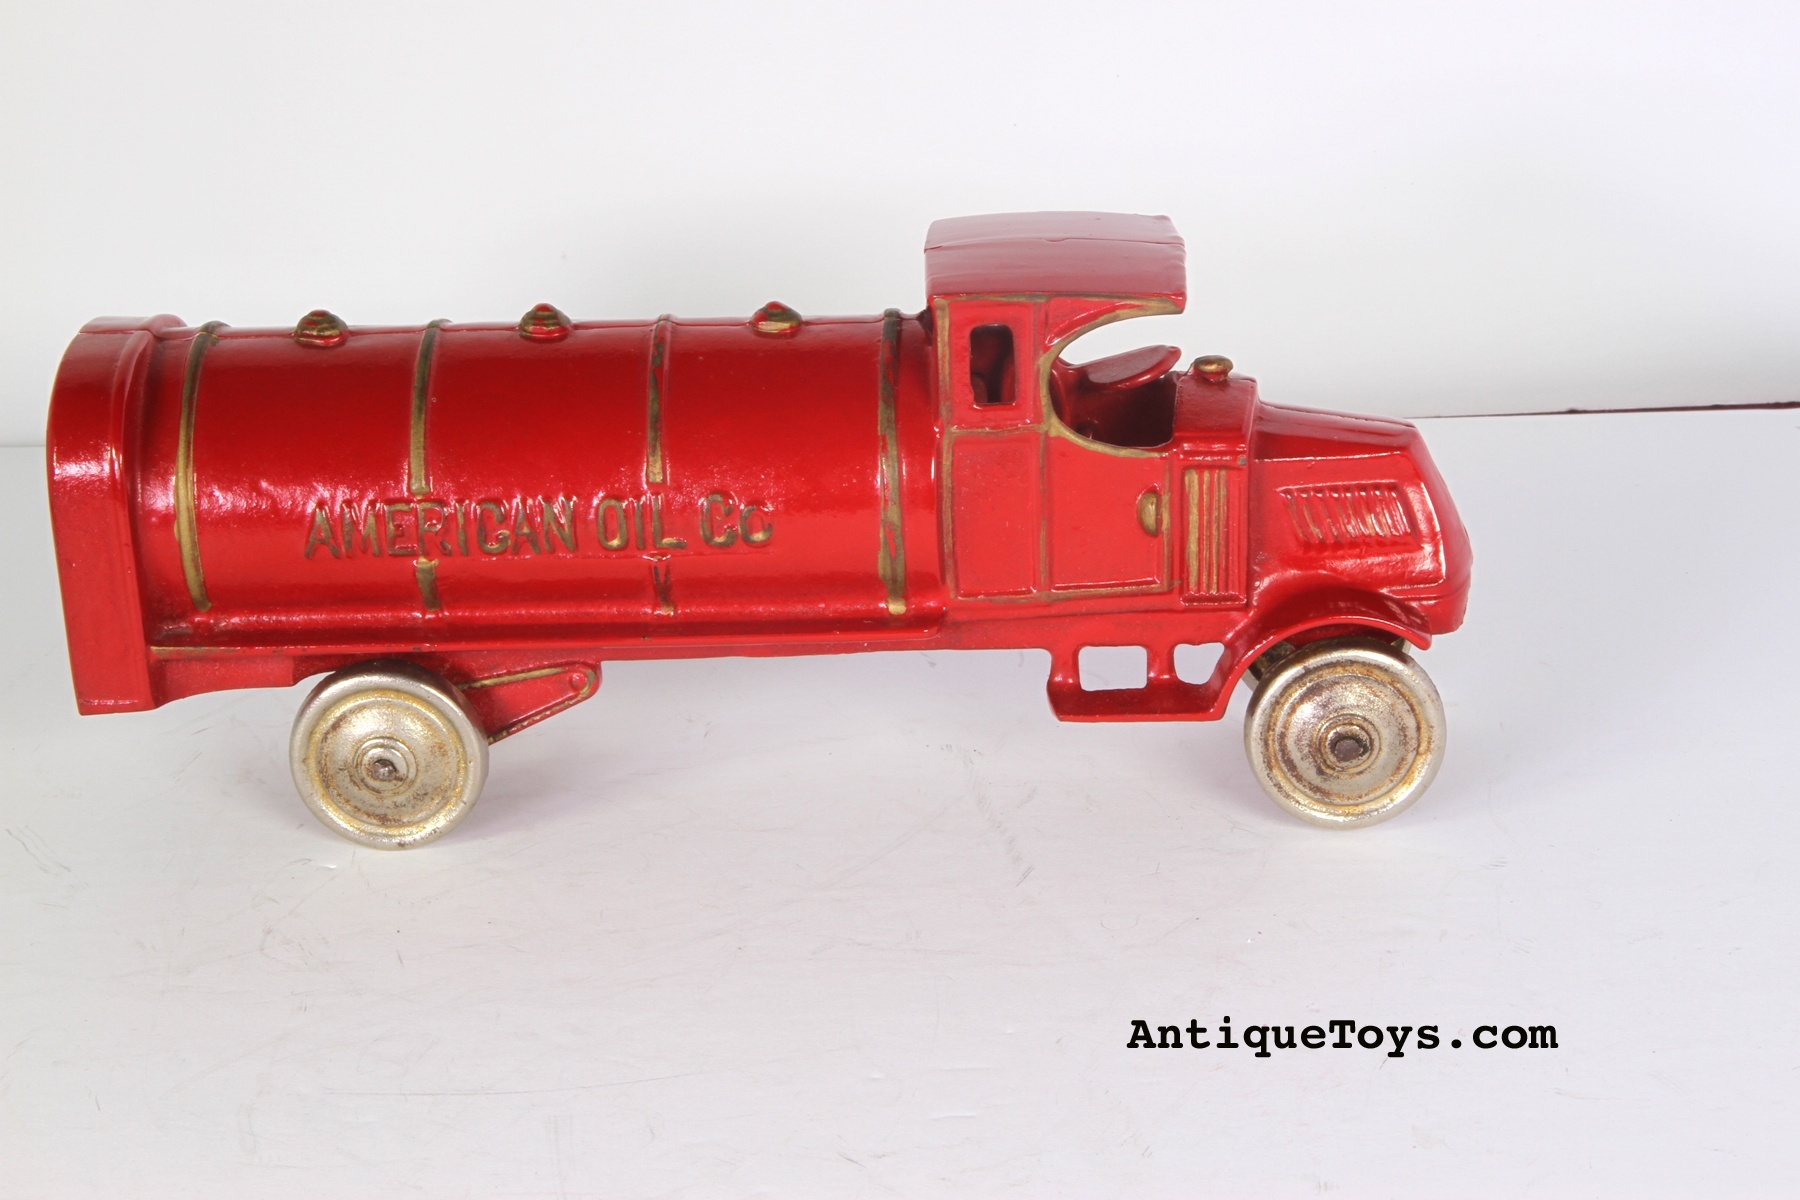 Dent Cast Iron Cars and Trucks -  - Antique Toys for Sale